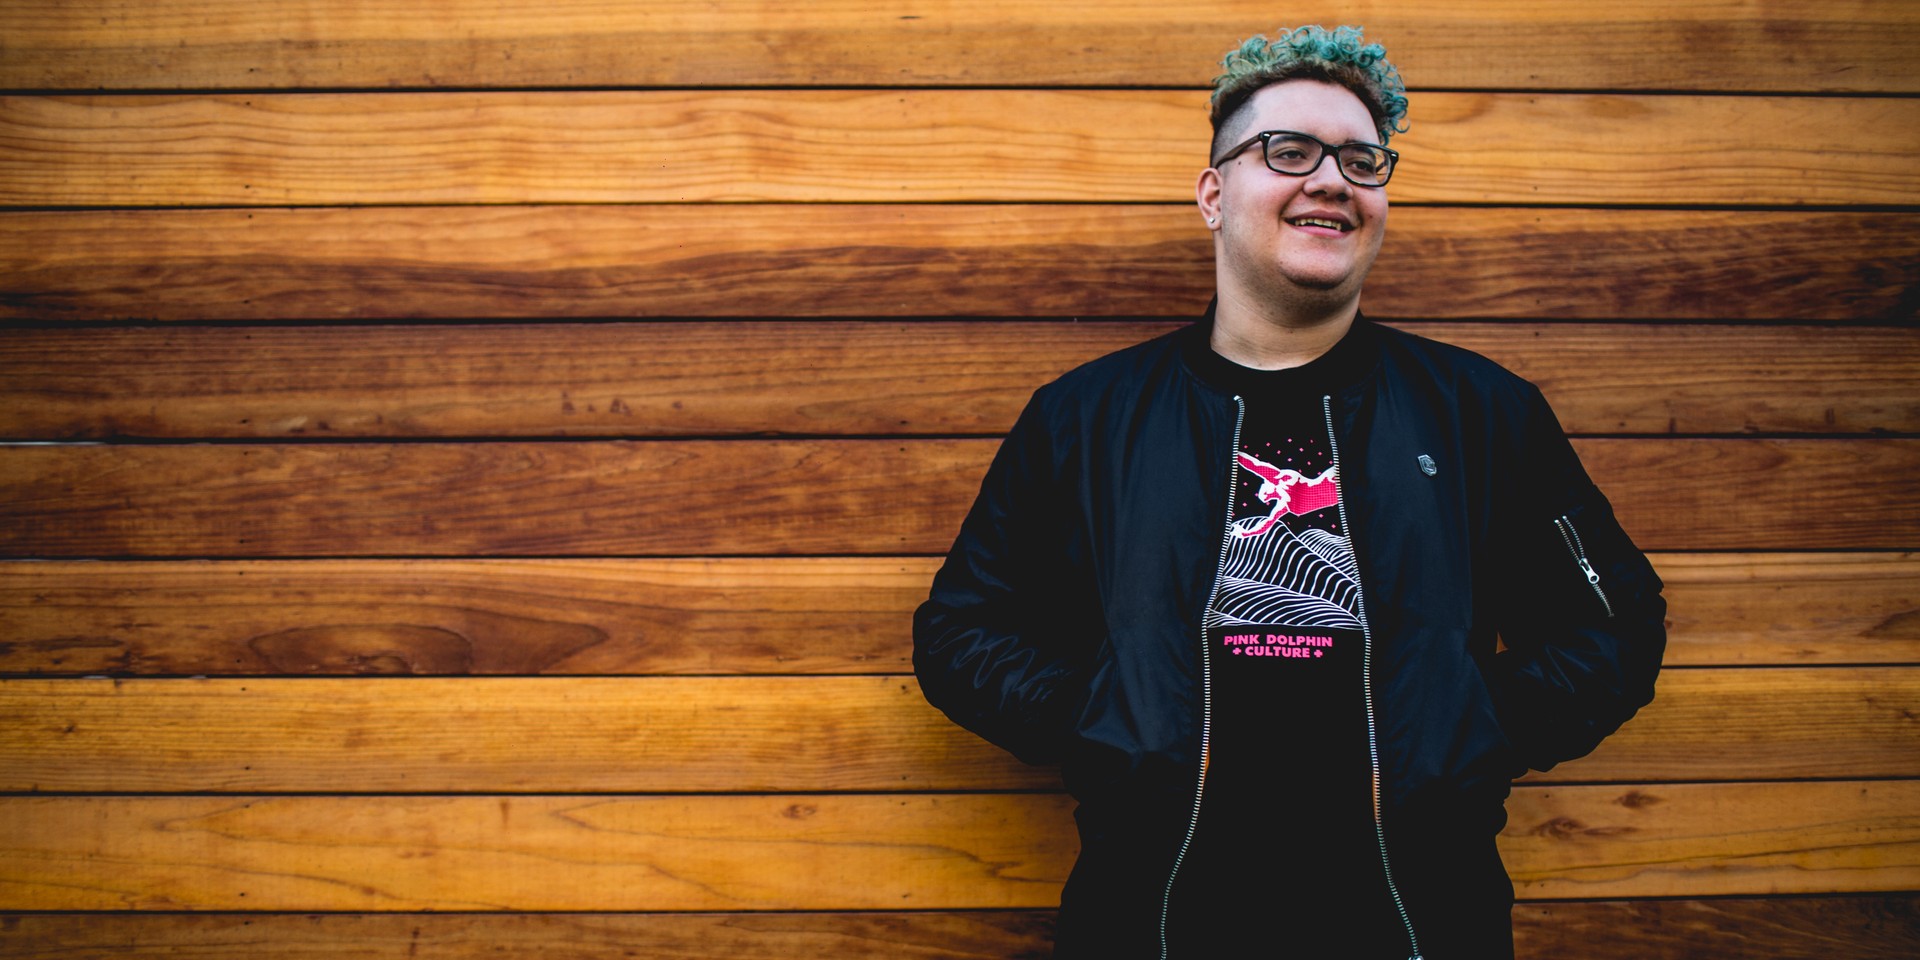 "Just hold on, things do get easier": Slushii on dealing with Asperger's Syndrome, his latest album DREAM and what he has in store for 2019